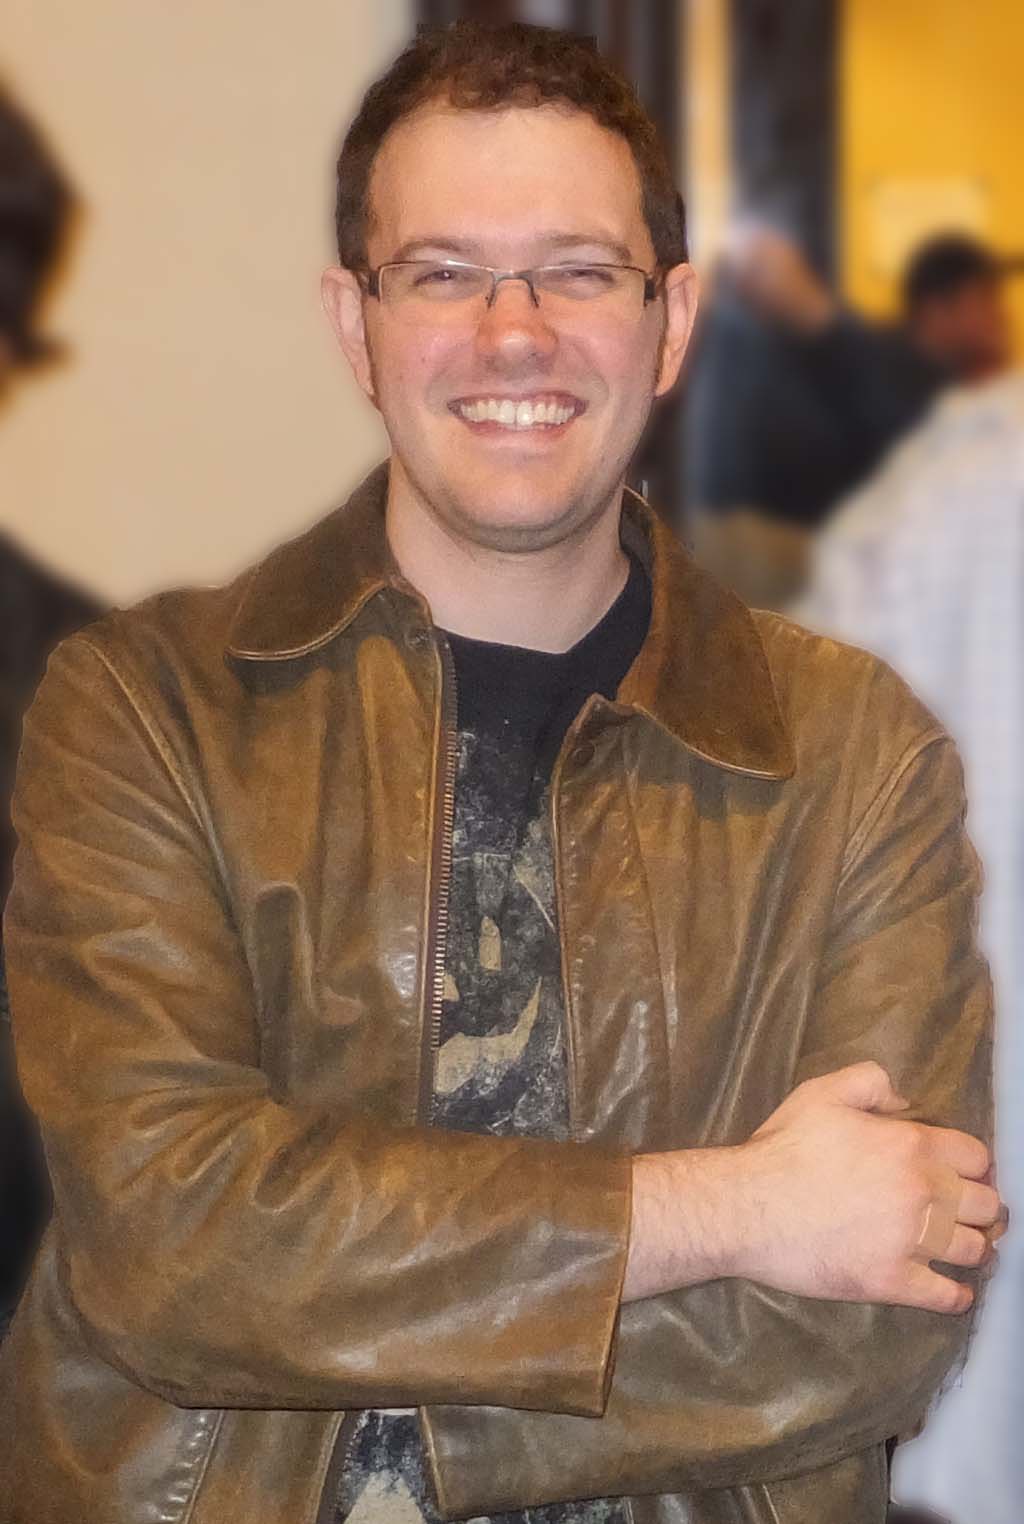 I would like to wish a happy birthday to James Rolfe, a.k.a. the Angry Video Game Nerd! 